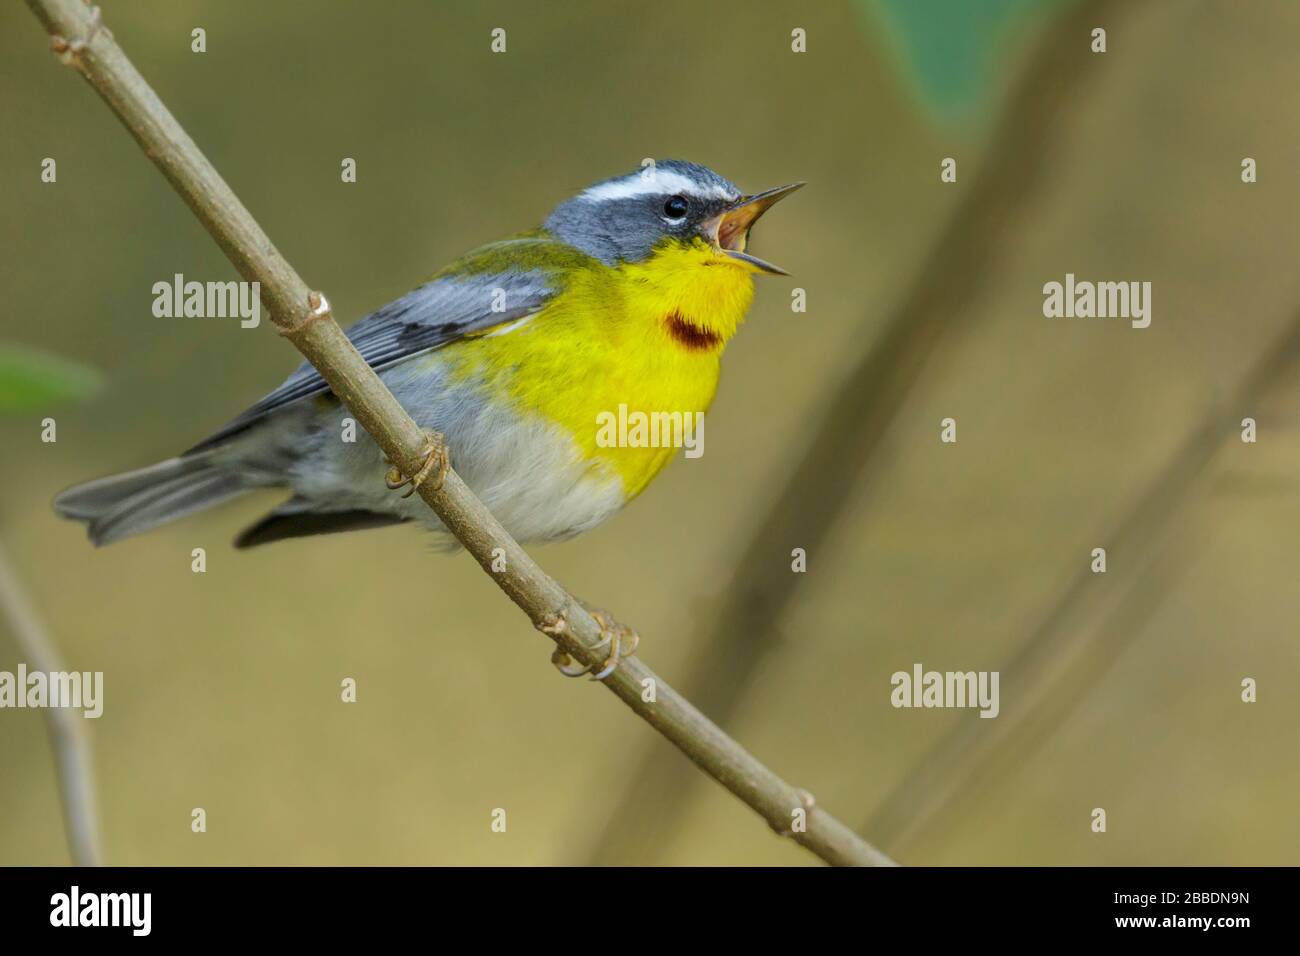 Crescent-chested Warbler (Oreothlypis superciliosa) perched on a branch in Guatemala in Central America. Stock Photo